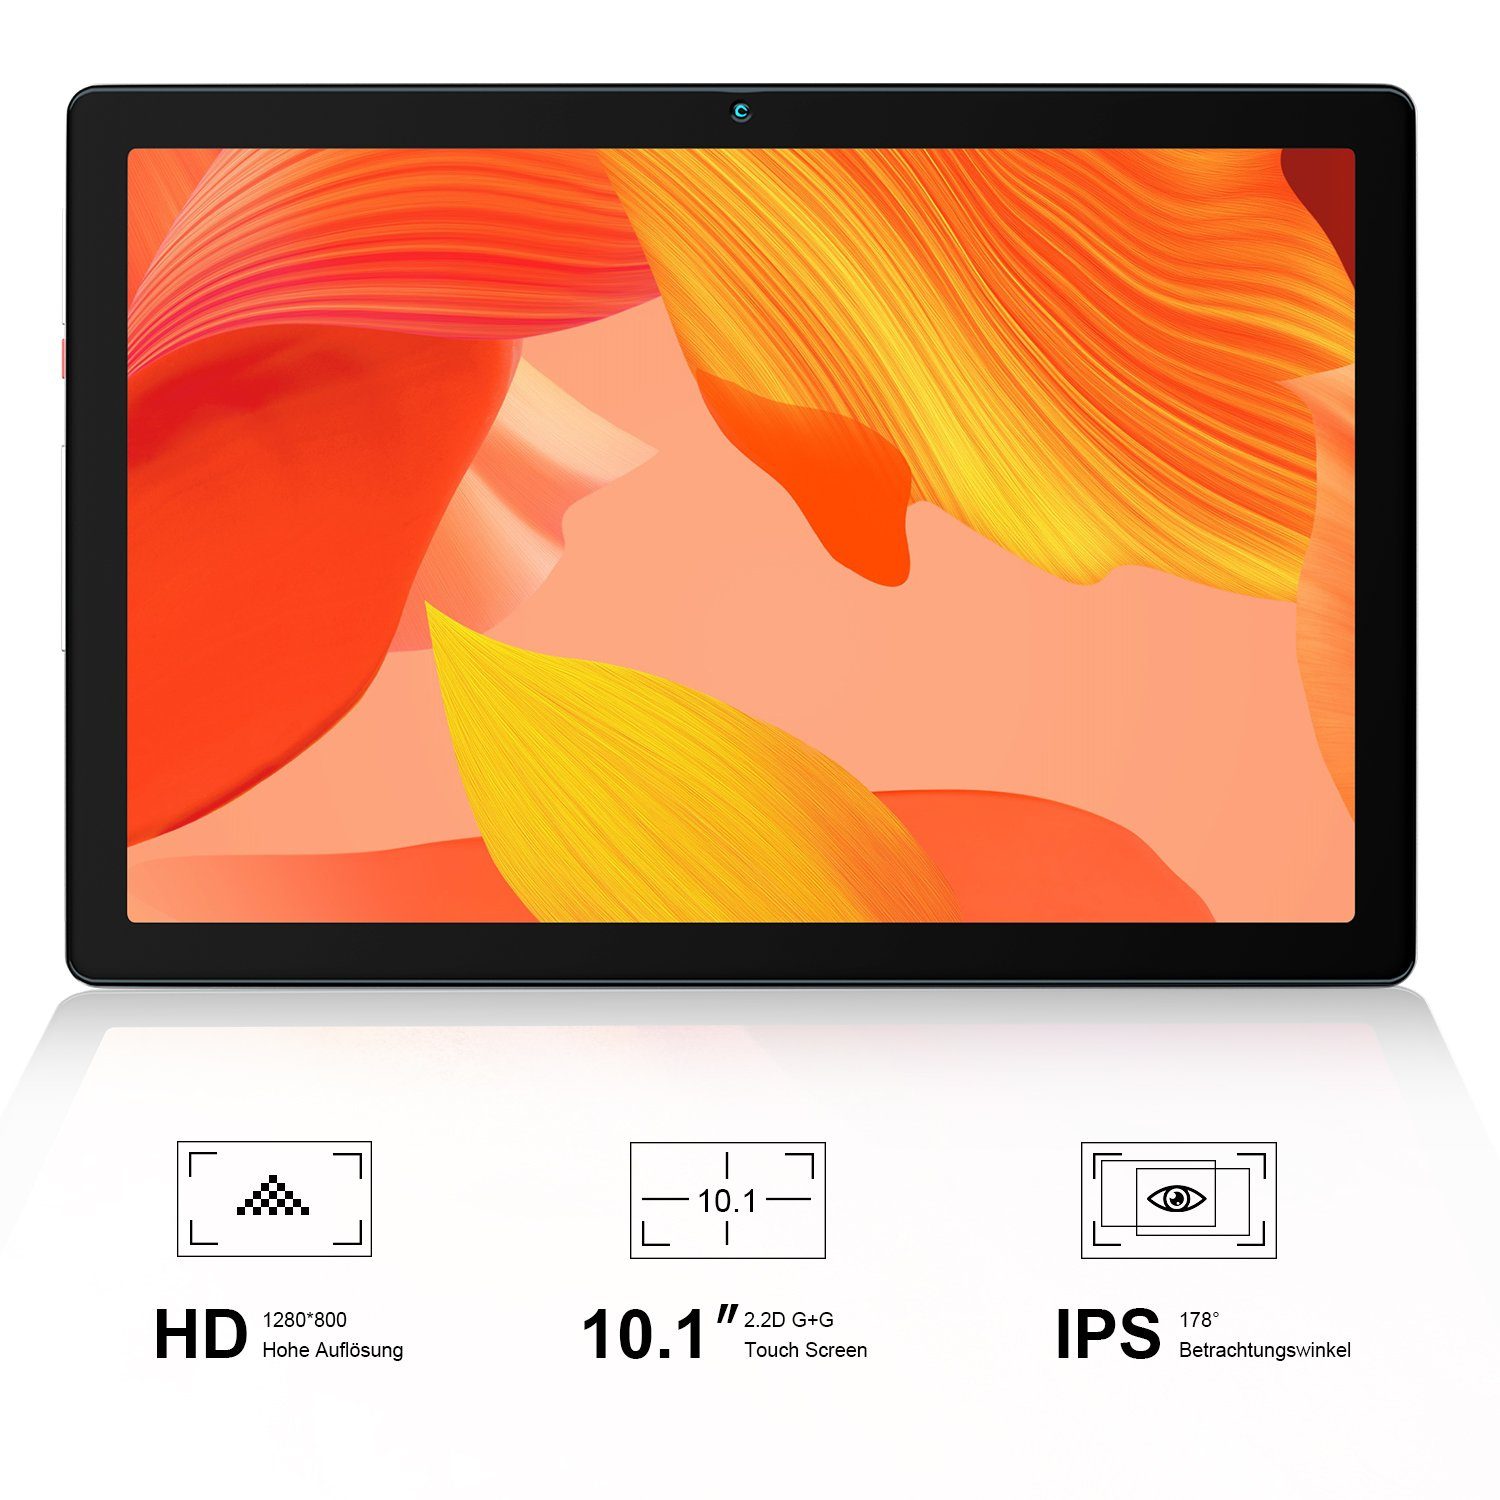 GB, Große 12, Happybe Android Tablet MB1001 Kapazität) 32 (10",